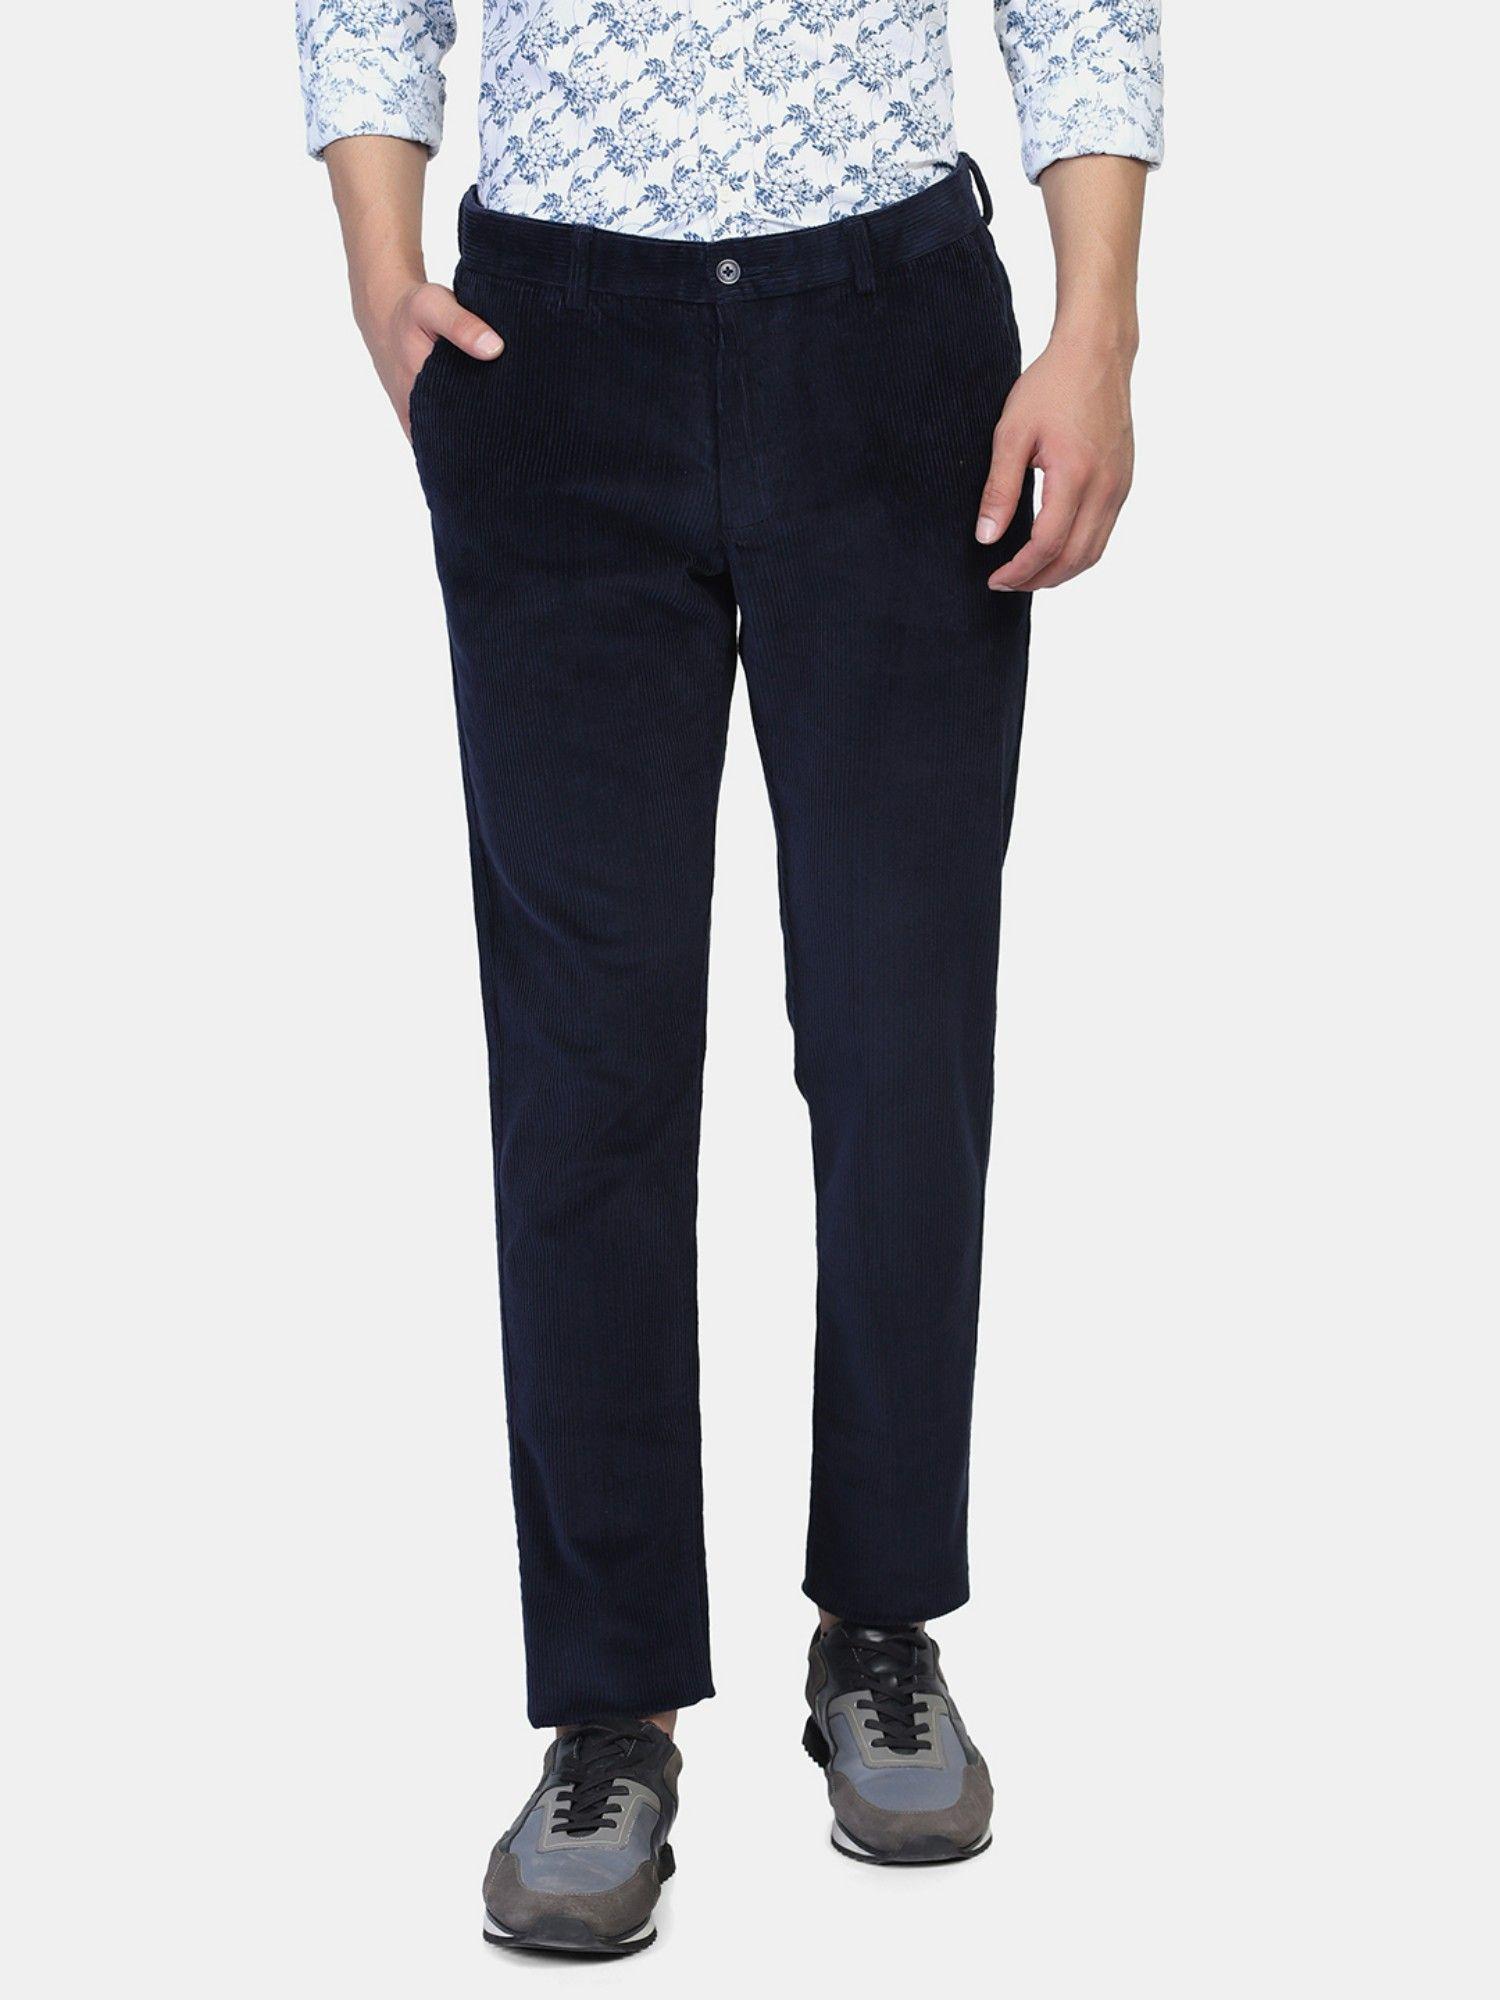 Rolf Casual Skinny Fit Trouser in Navy Blue